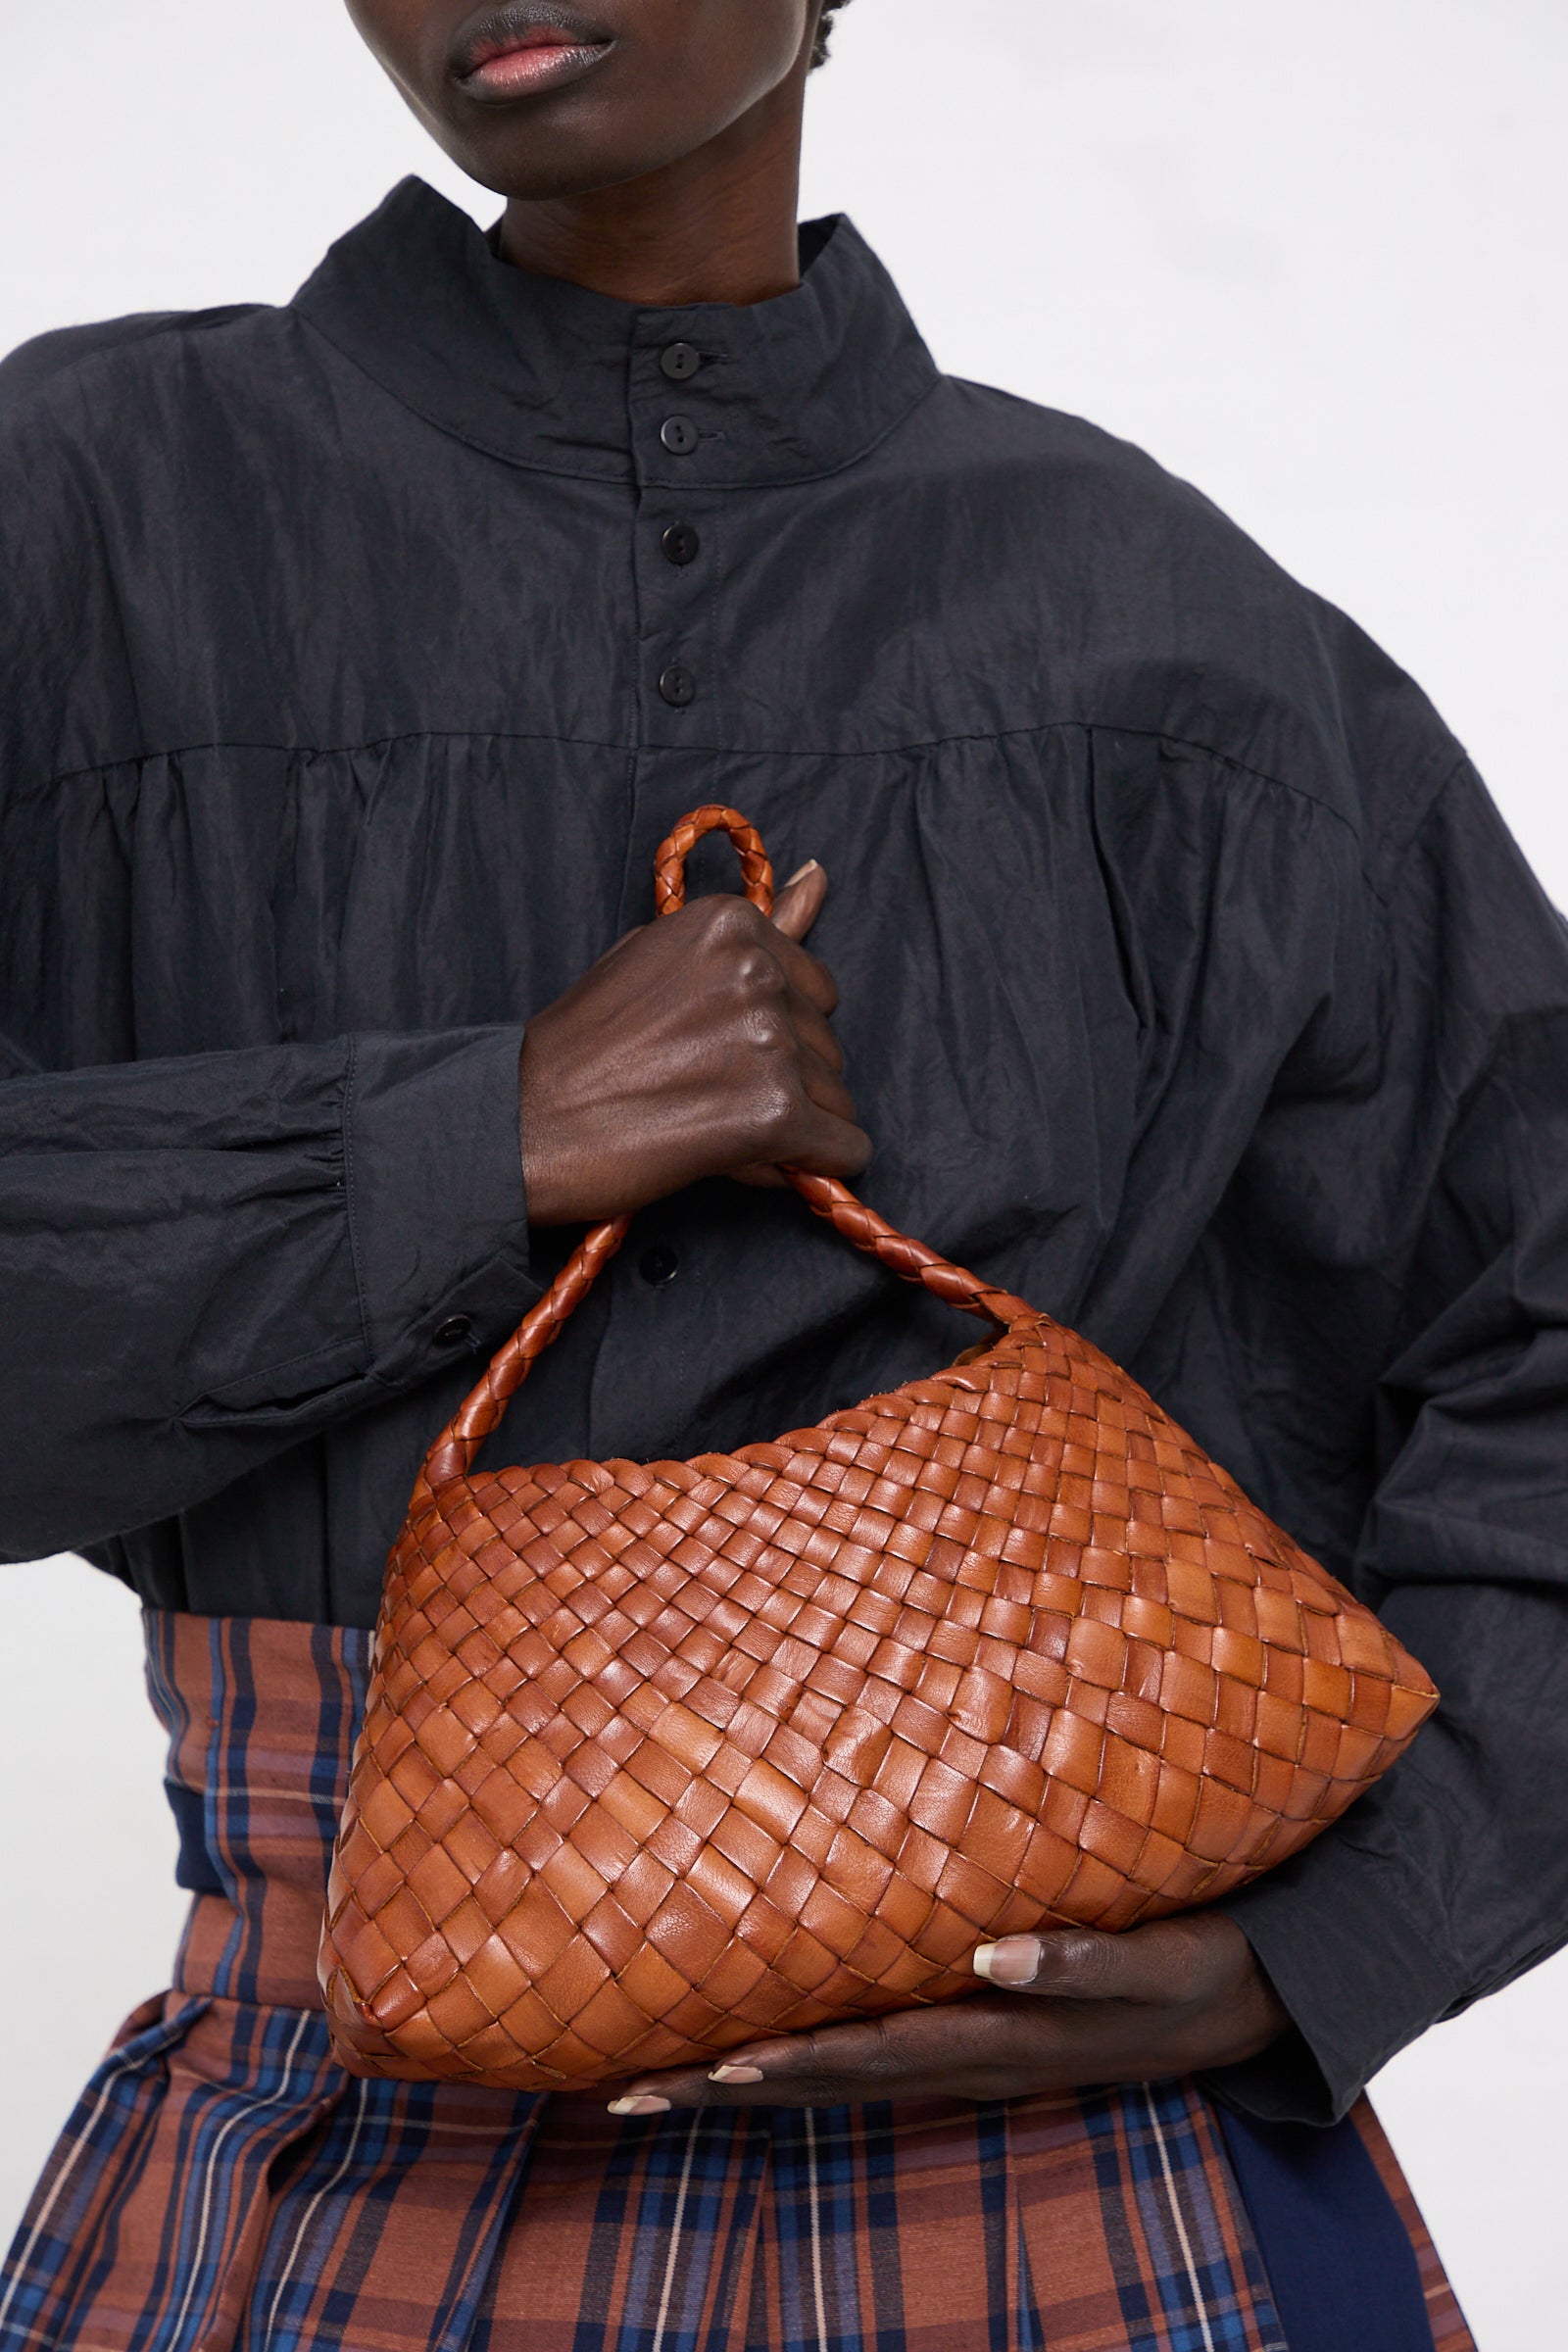 A person in a dark ruffled shirt and plaid pants holding a Dragon Diffusion handwoven brown leather bag called Rosanna in Tan. Only the torso and hands are visible.